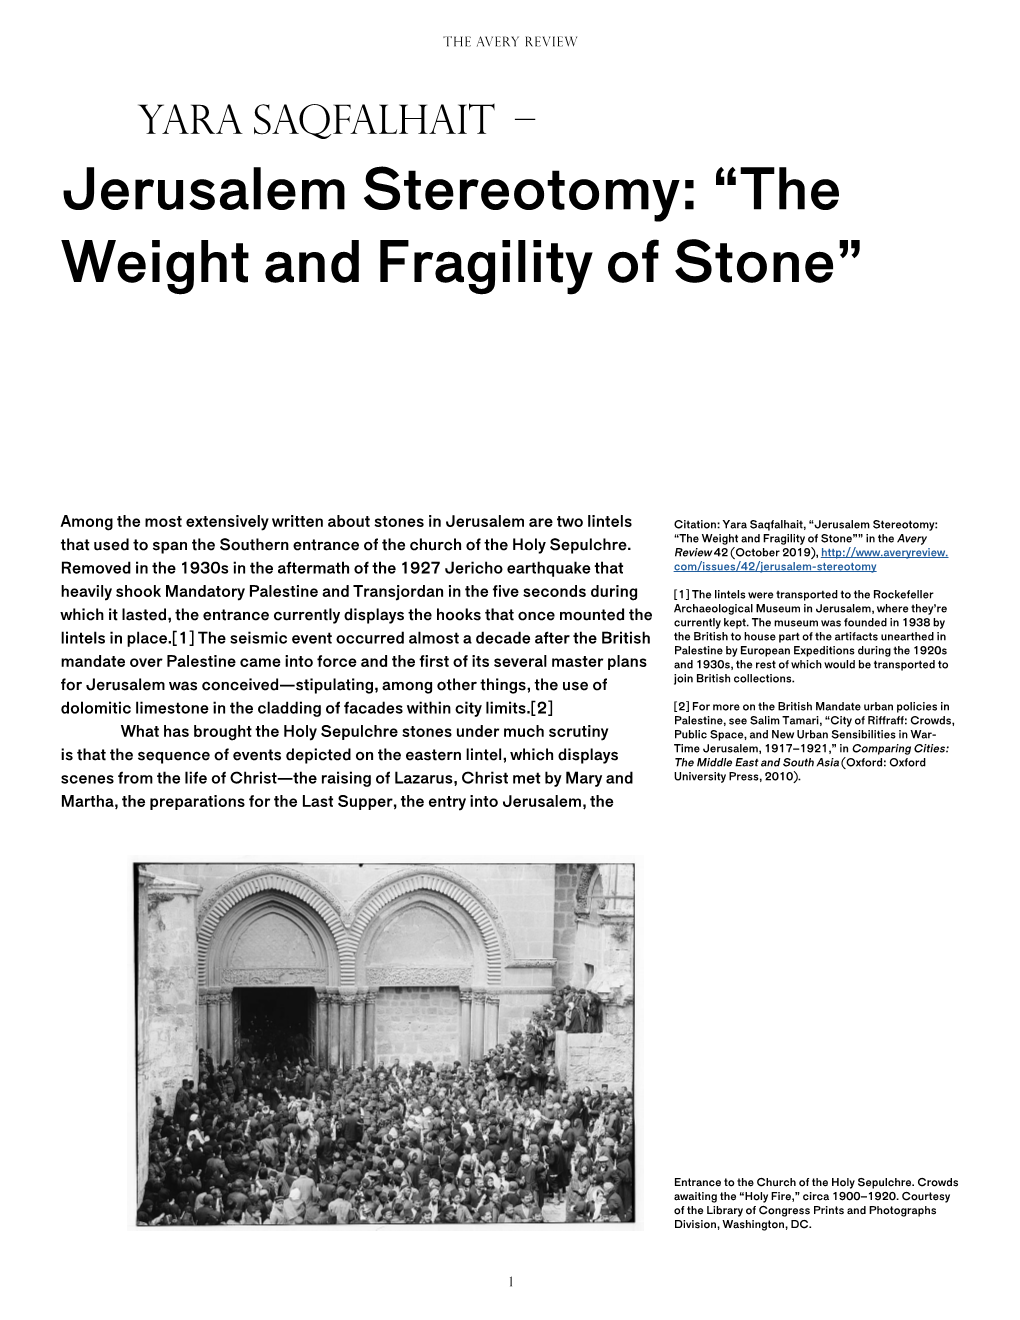 Jerusalem Stereotomy: “The Weight and Fragility of Stone”